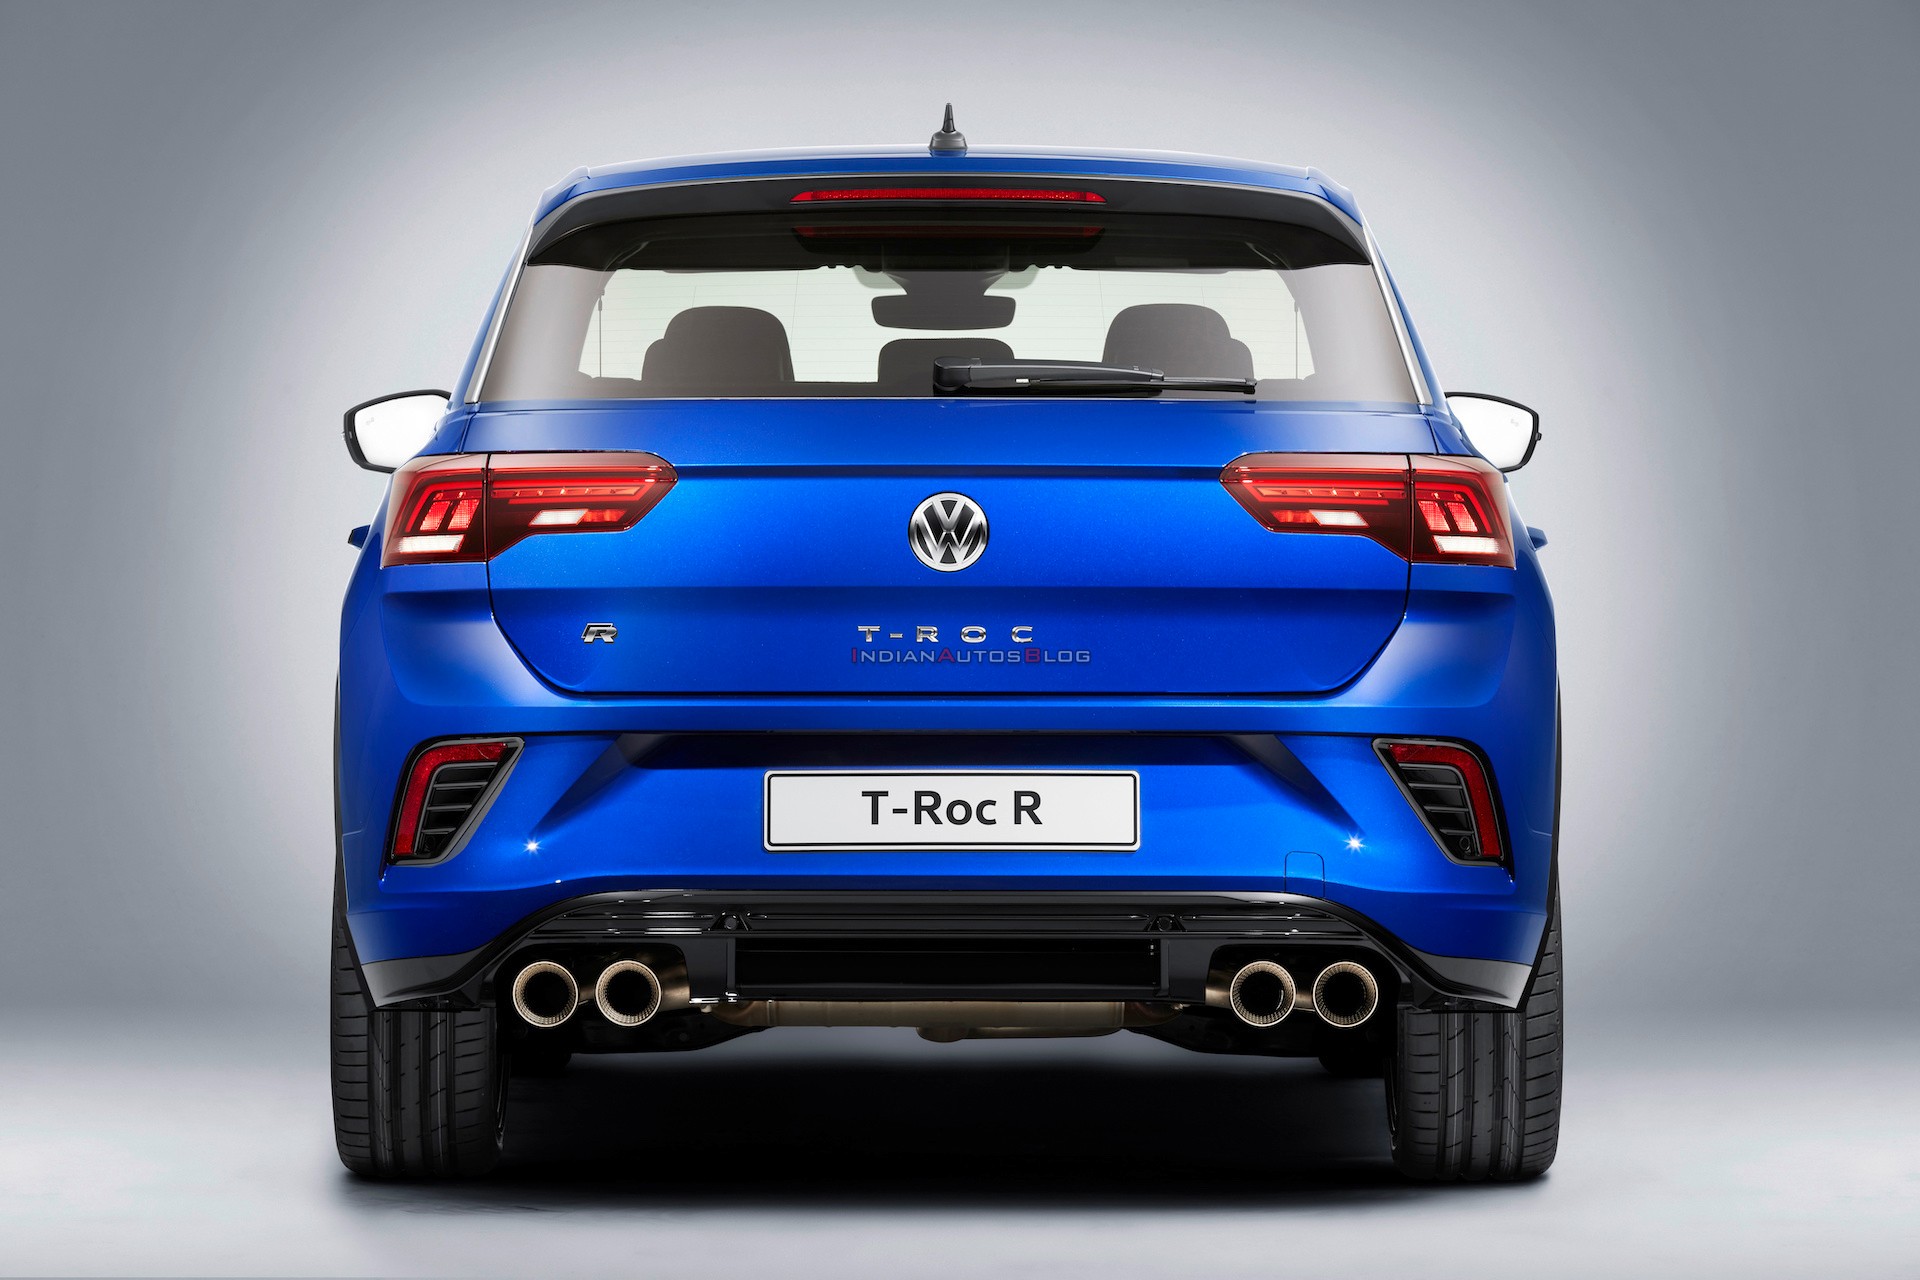 300 PS VW T-Roc R could be launched in India - 0-100 km/h in 4.8 seconds!